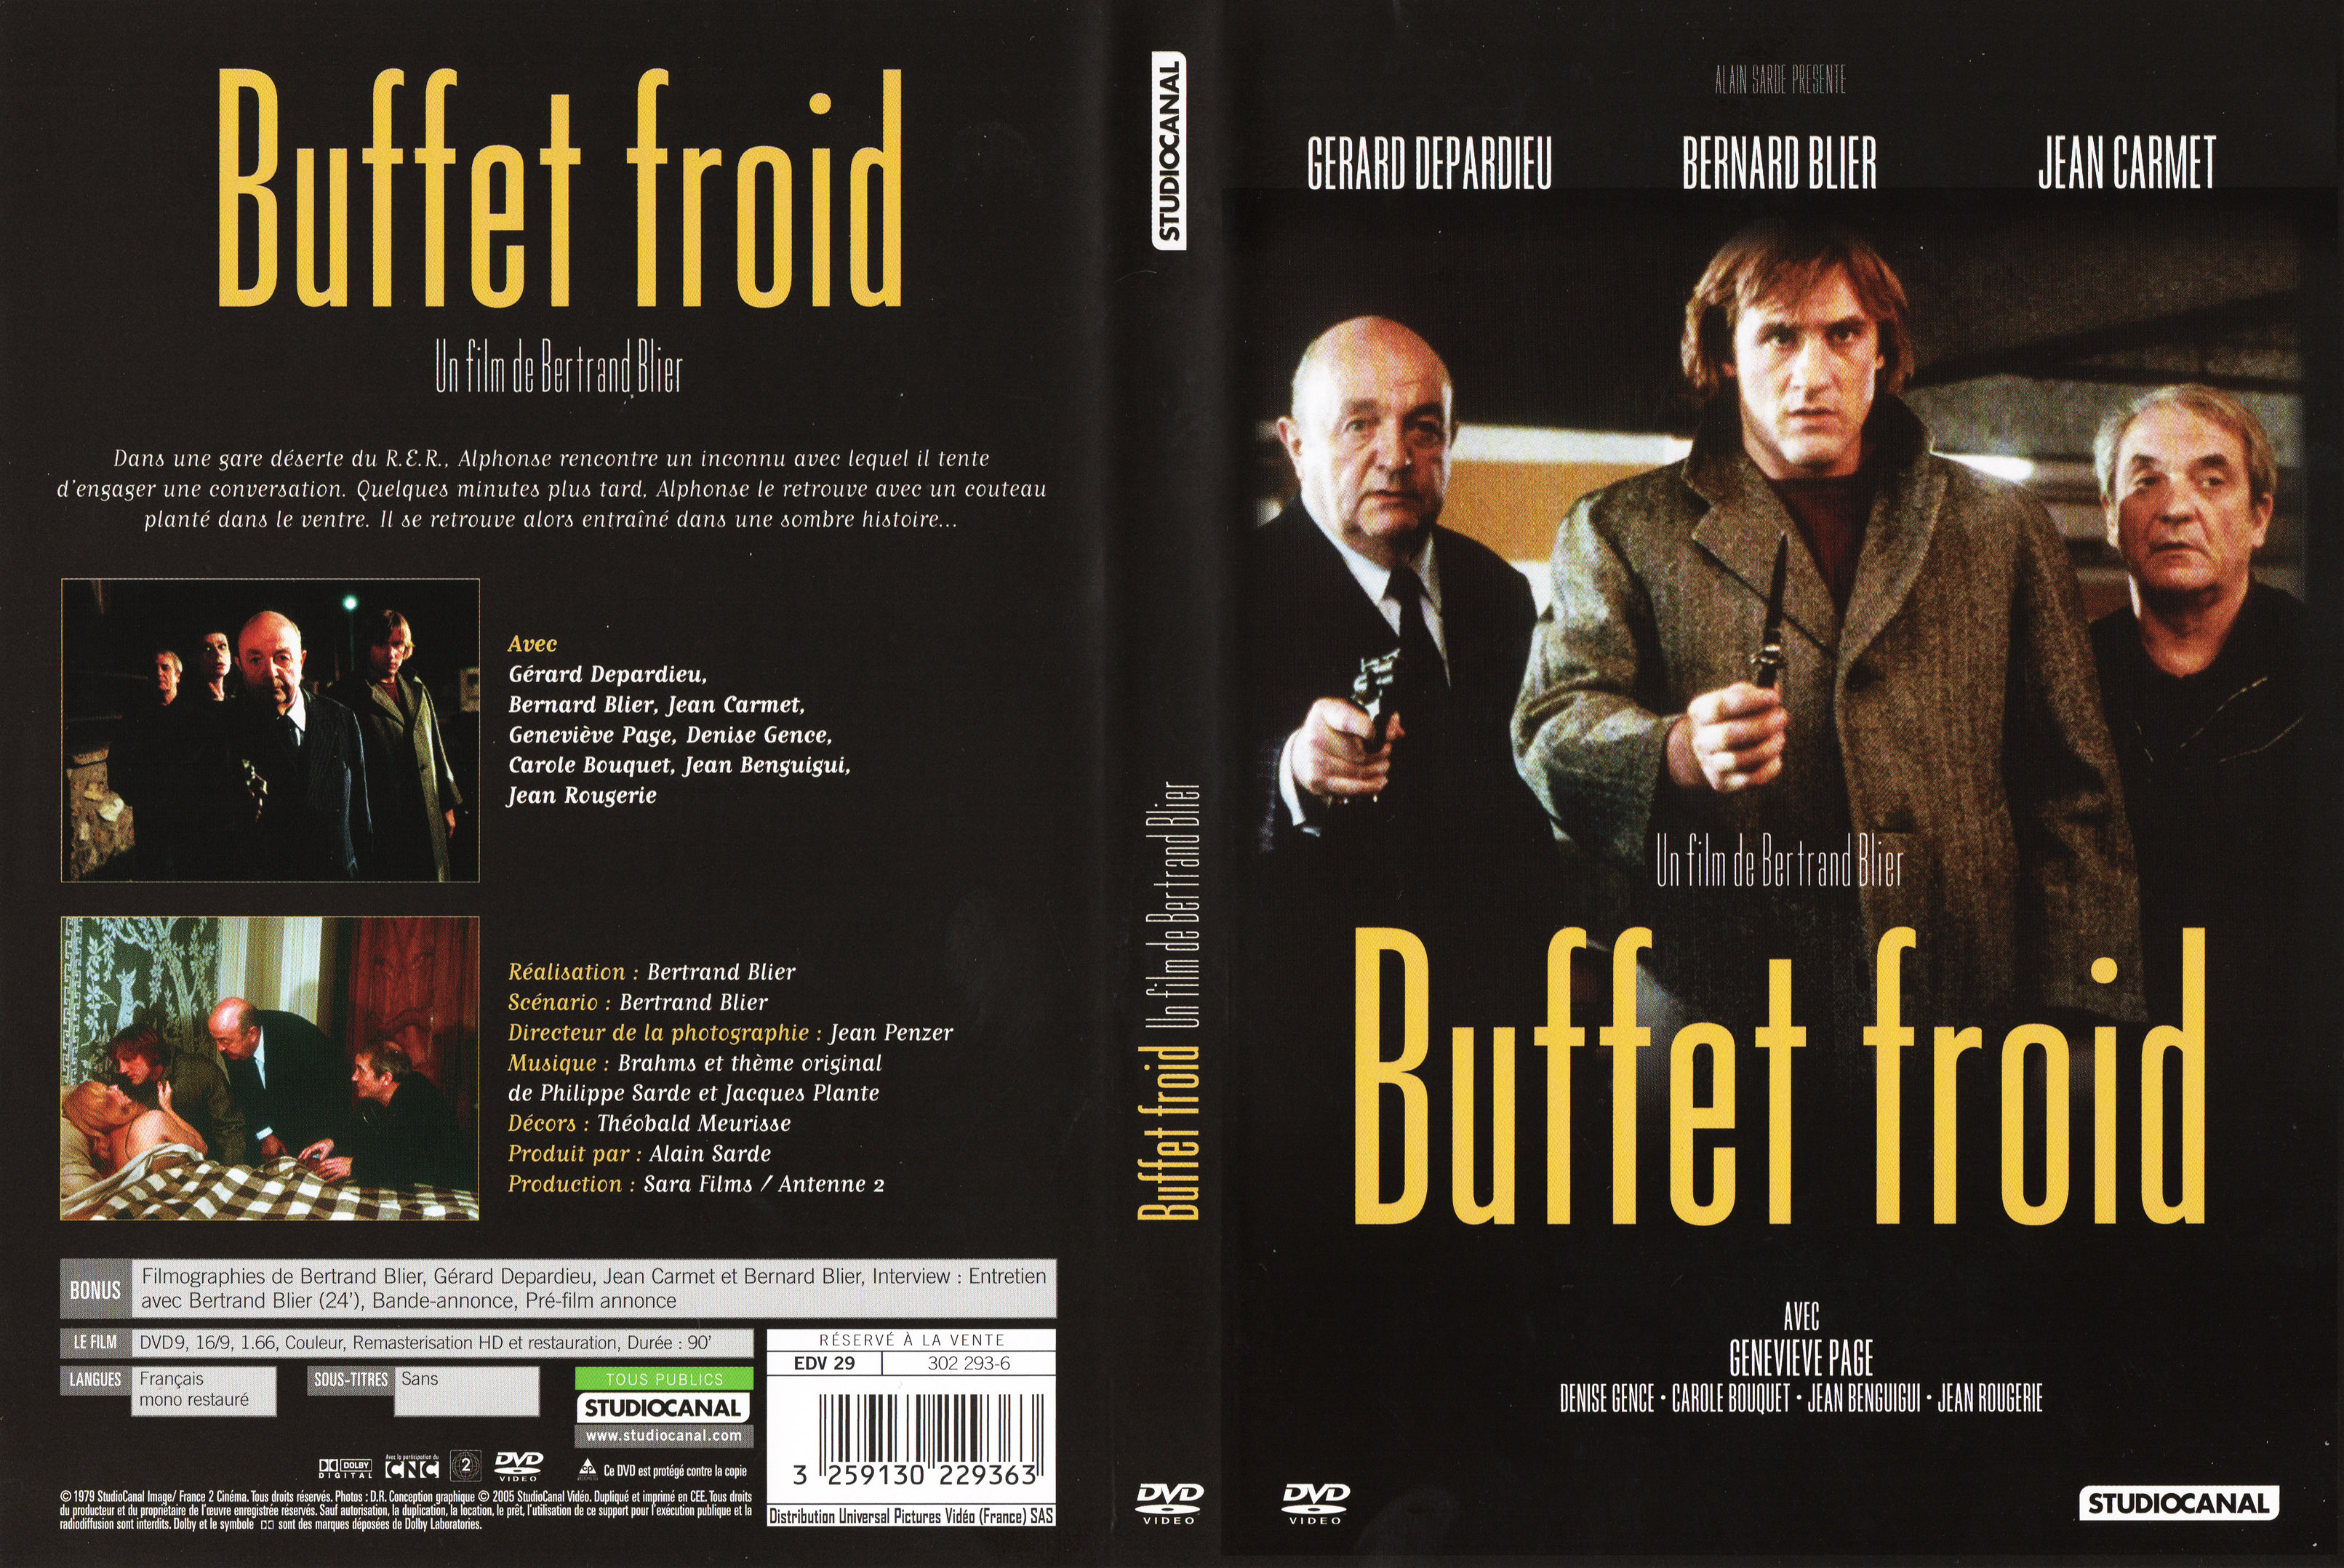 Jaquette DVD Buffet froid v3